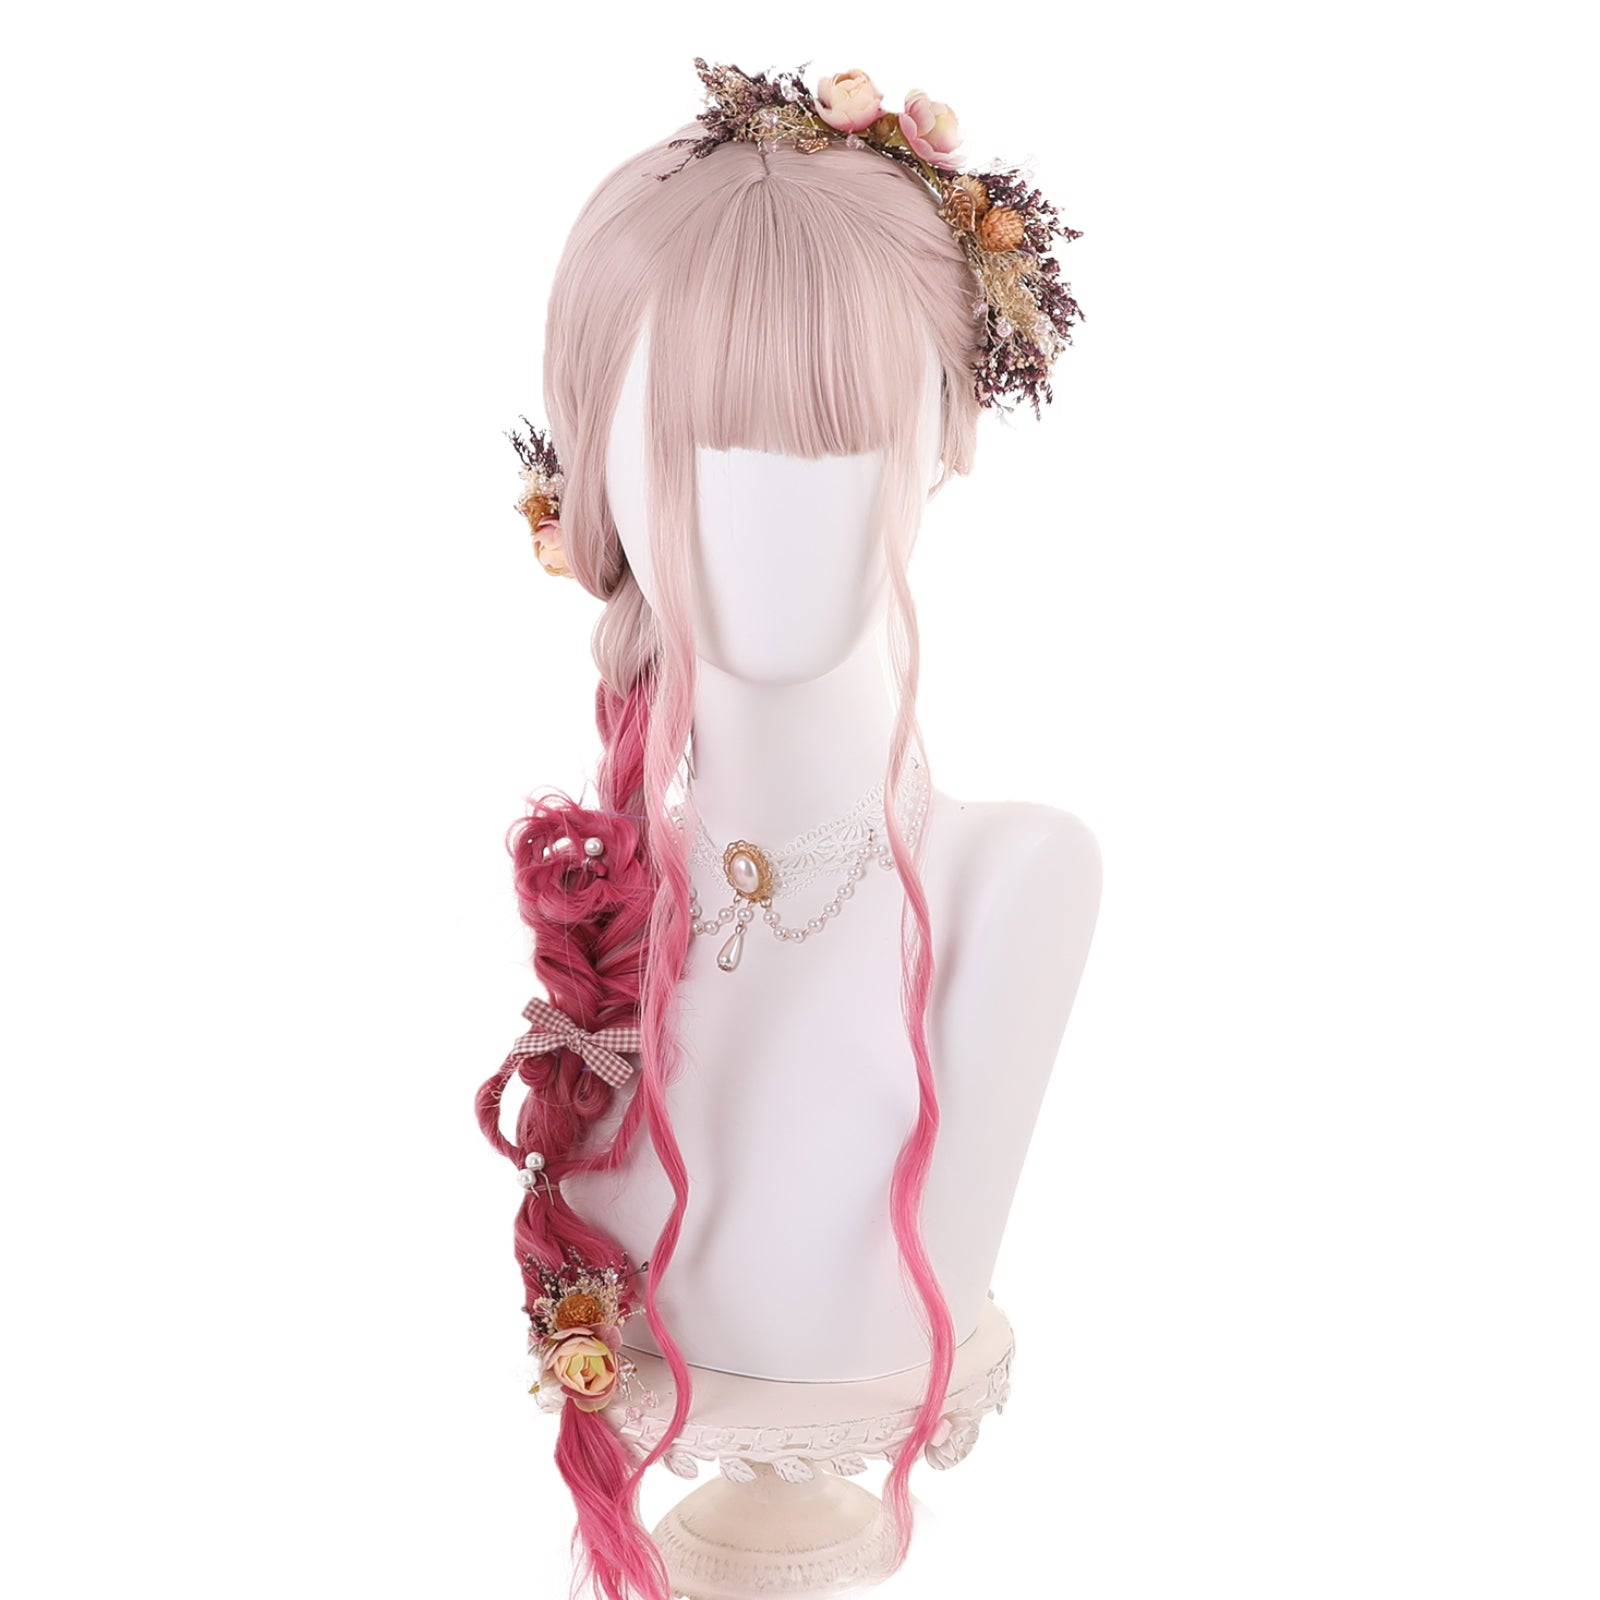 Rulercosplay Rainbow Candy Wigs Light pink gradient rose pink Long Lolita Wig